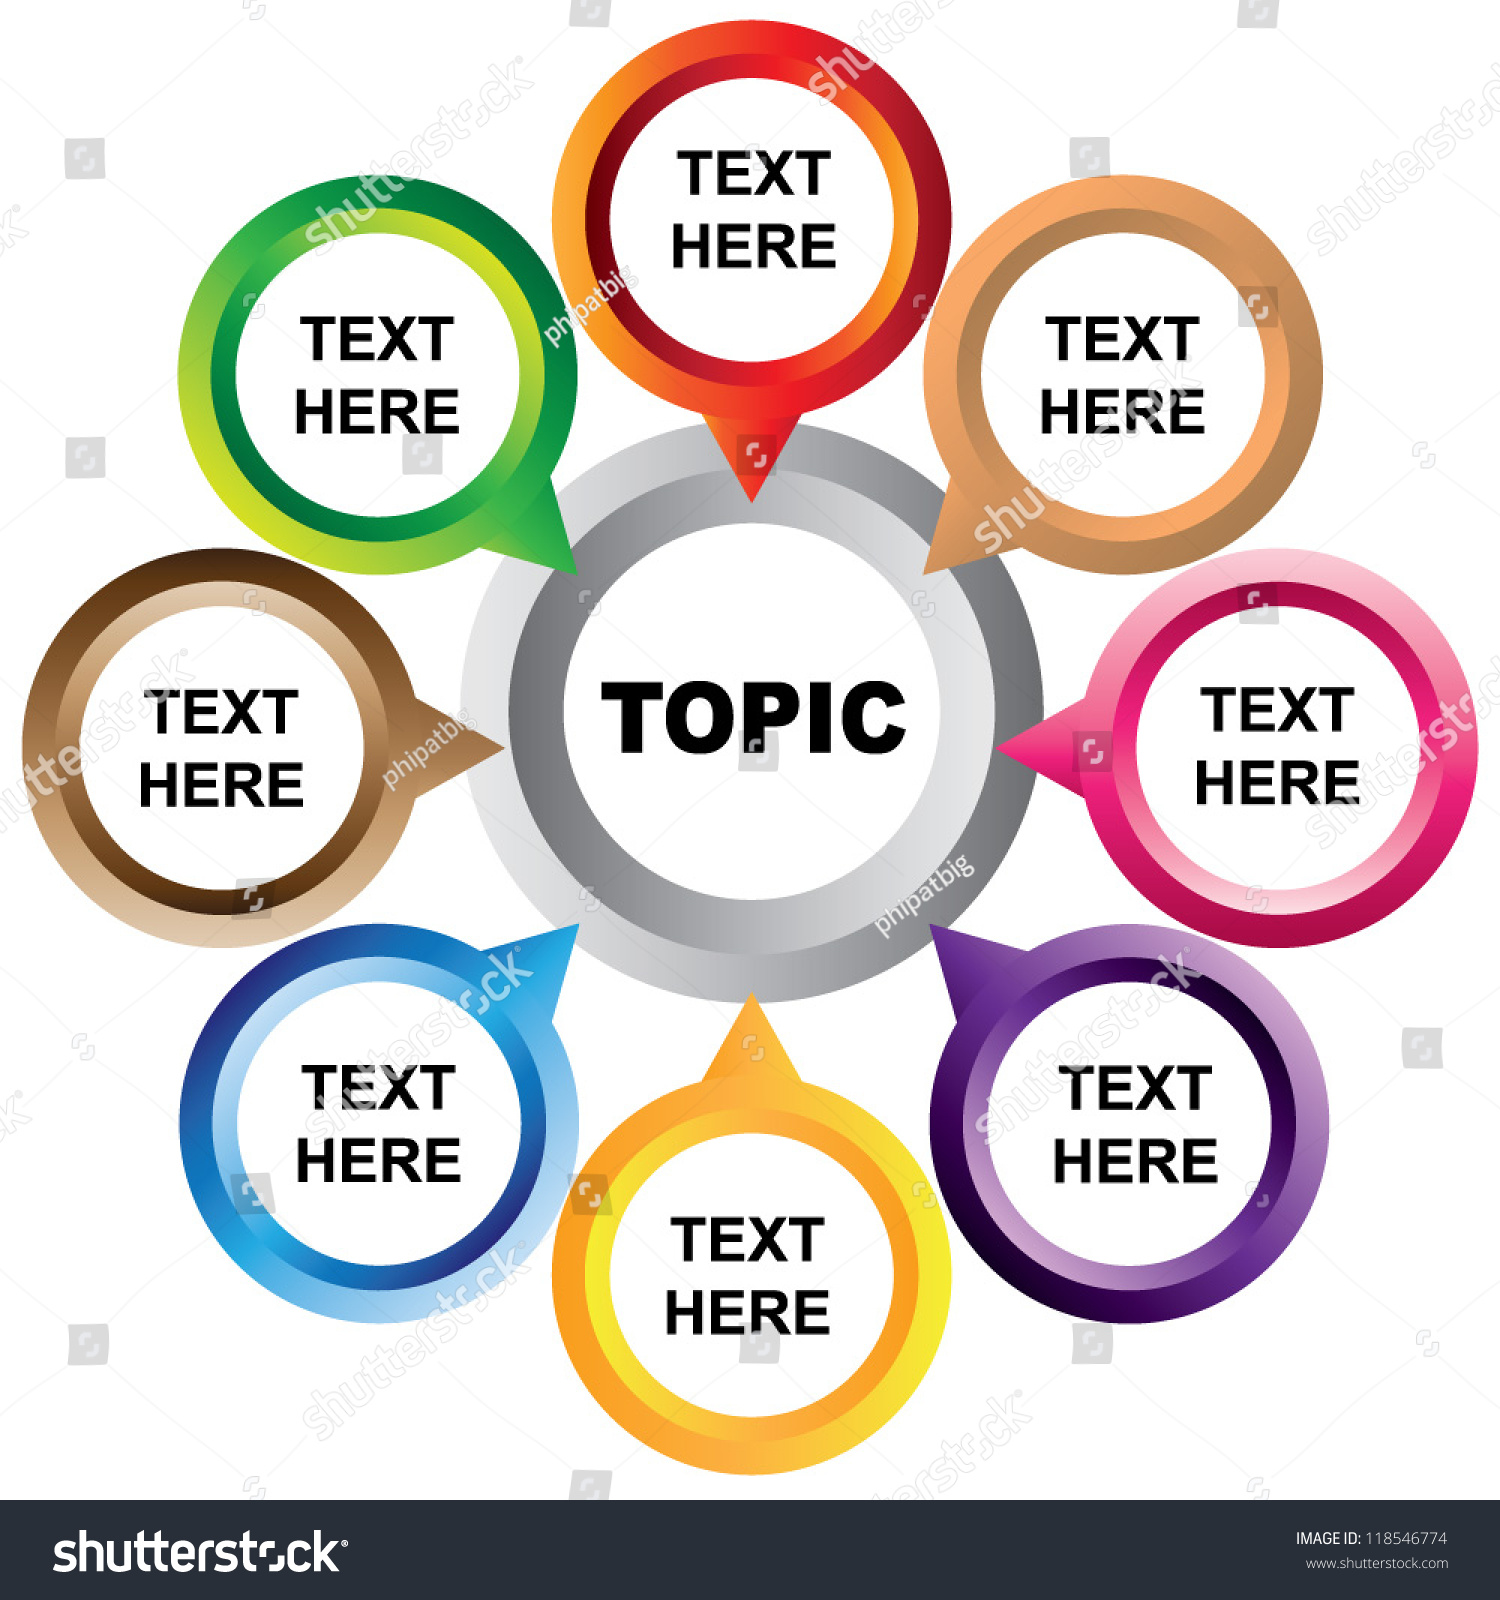 Presentation Template, Mind Mapping Diagram Stock Vector 118546774 